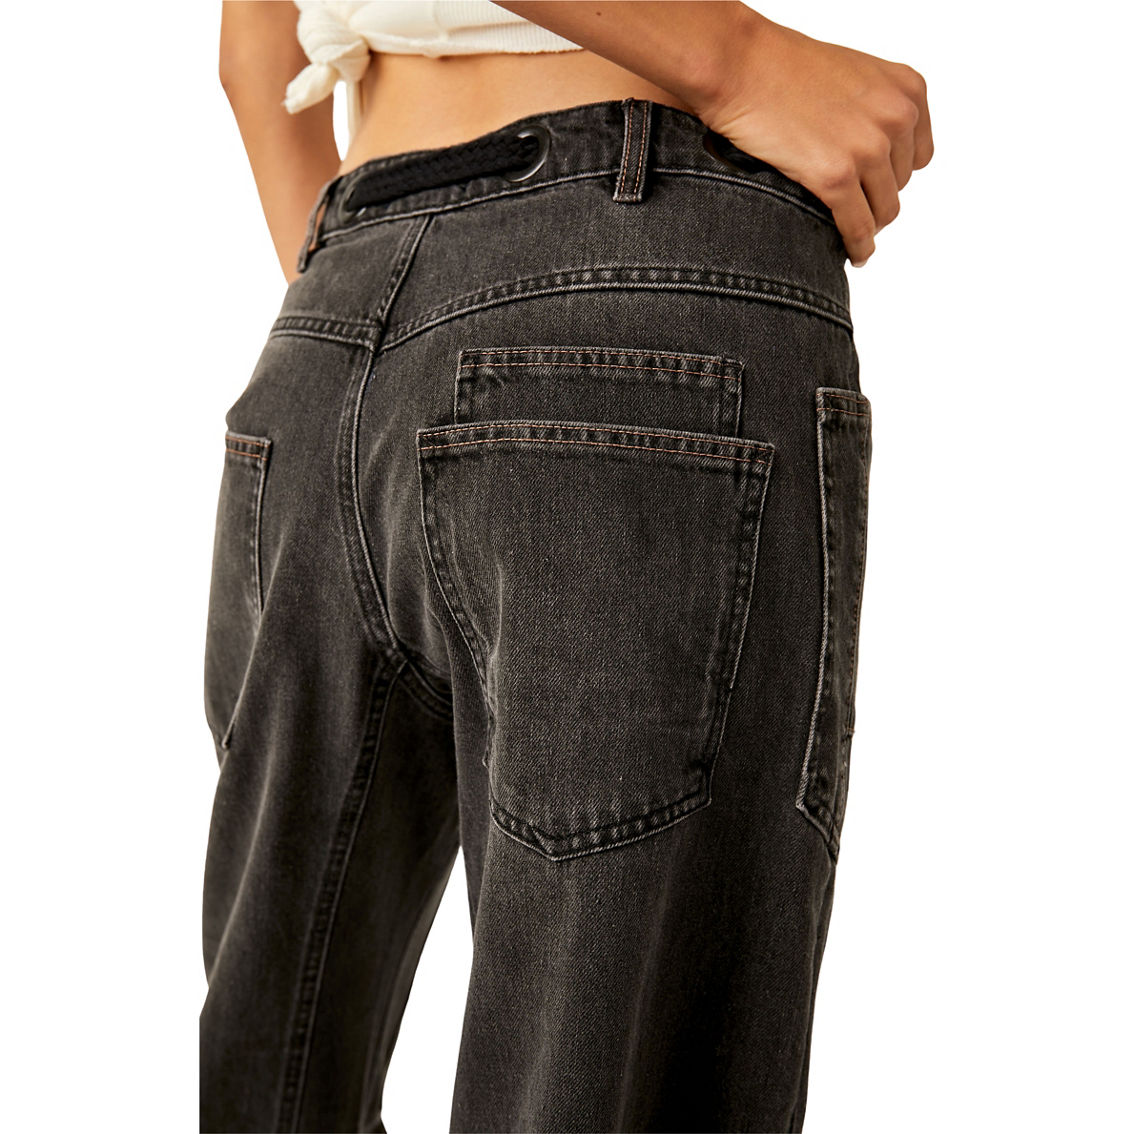 Free People Double Dutch Coated Pull On Jeans - Image 5 of 5